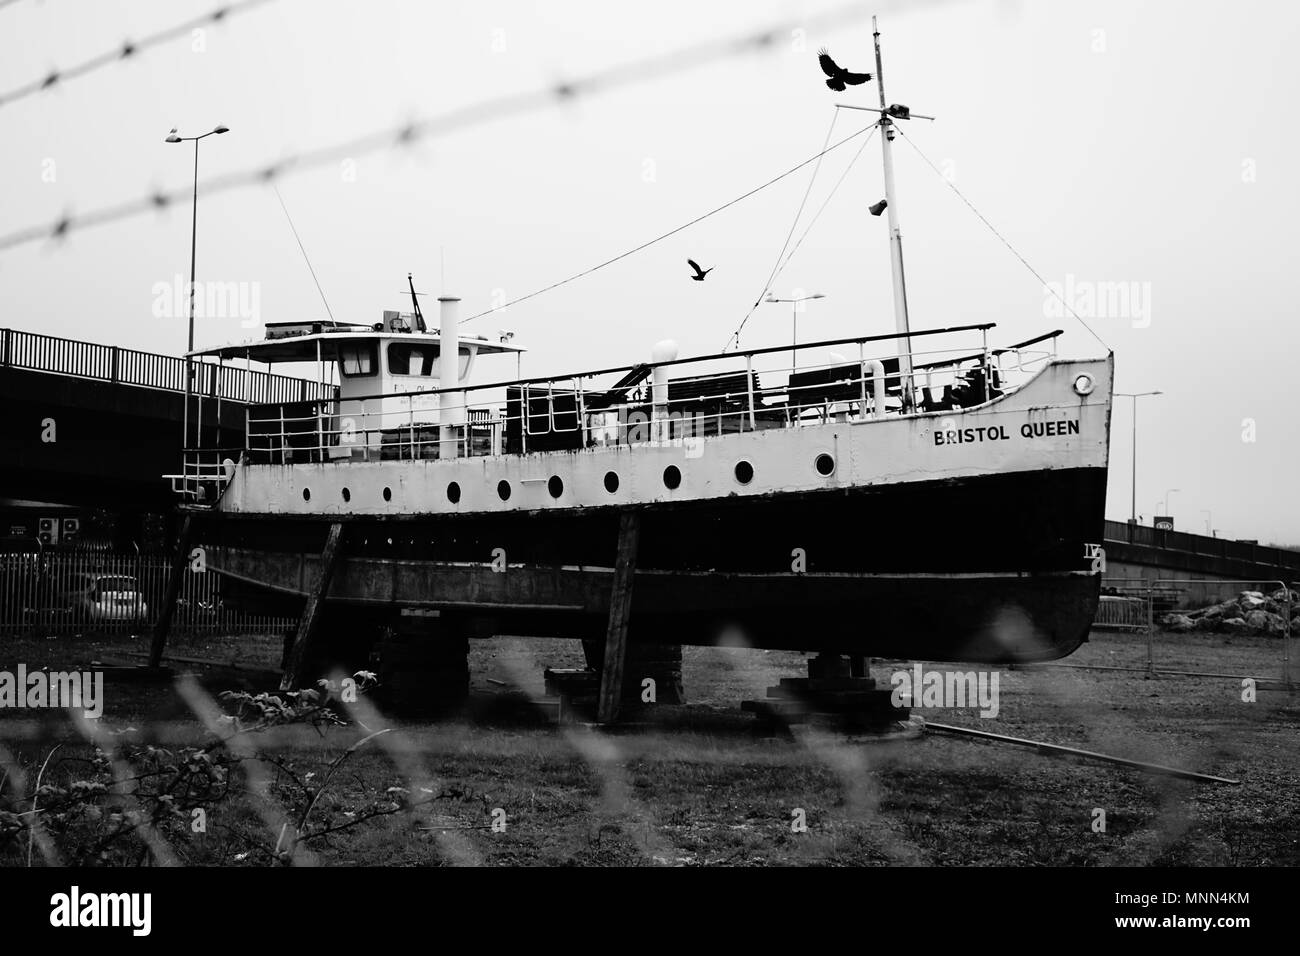 Boat in dry dock with birds alighting on it, in black and white Stock Photo